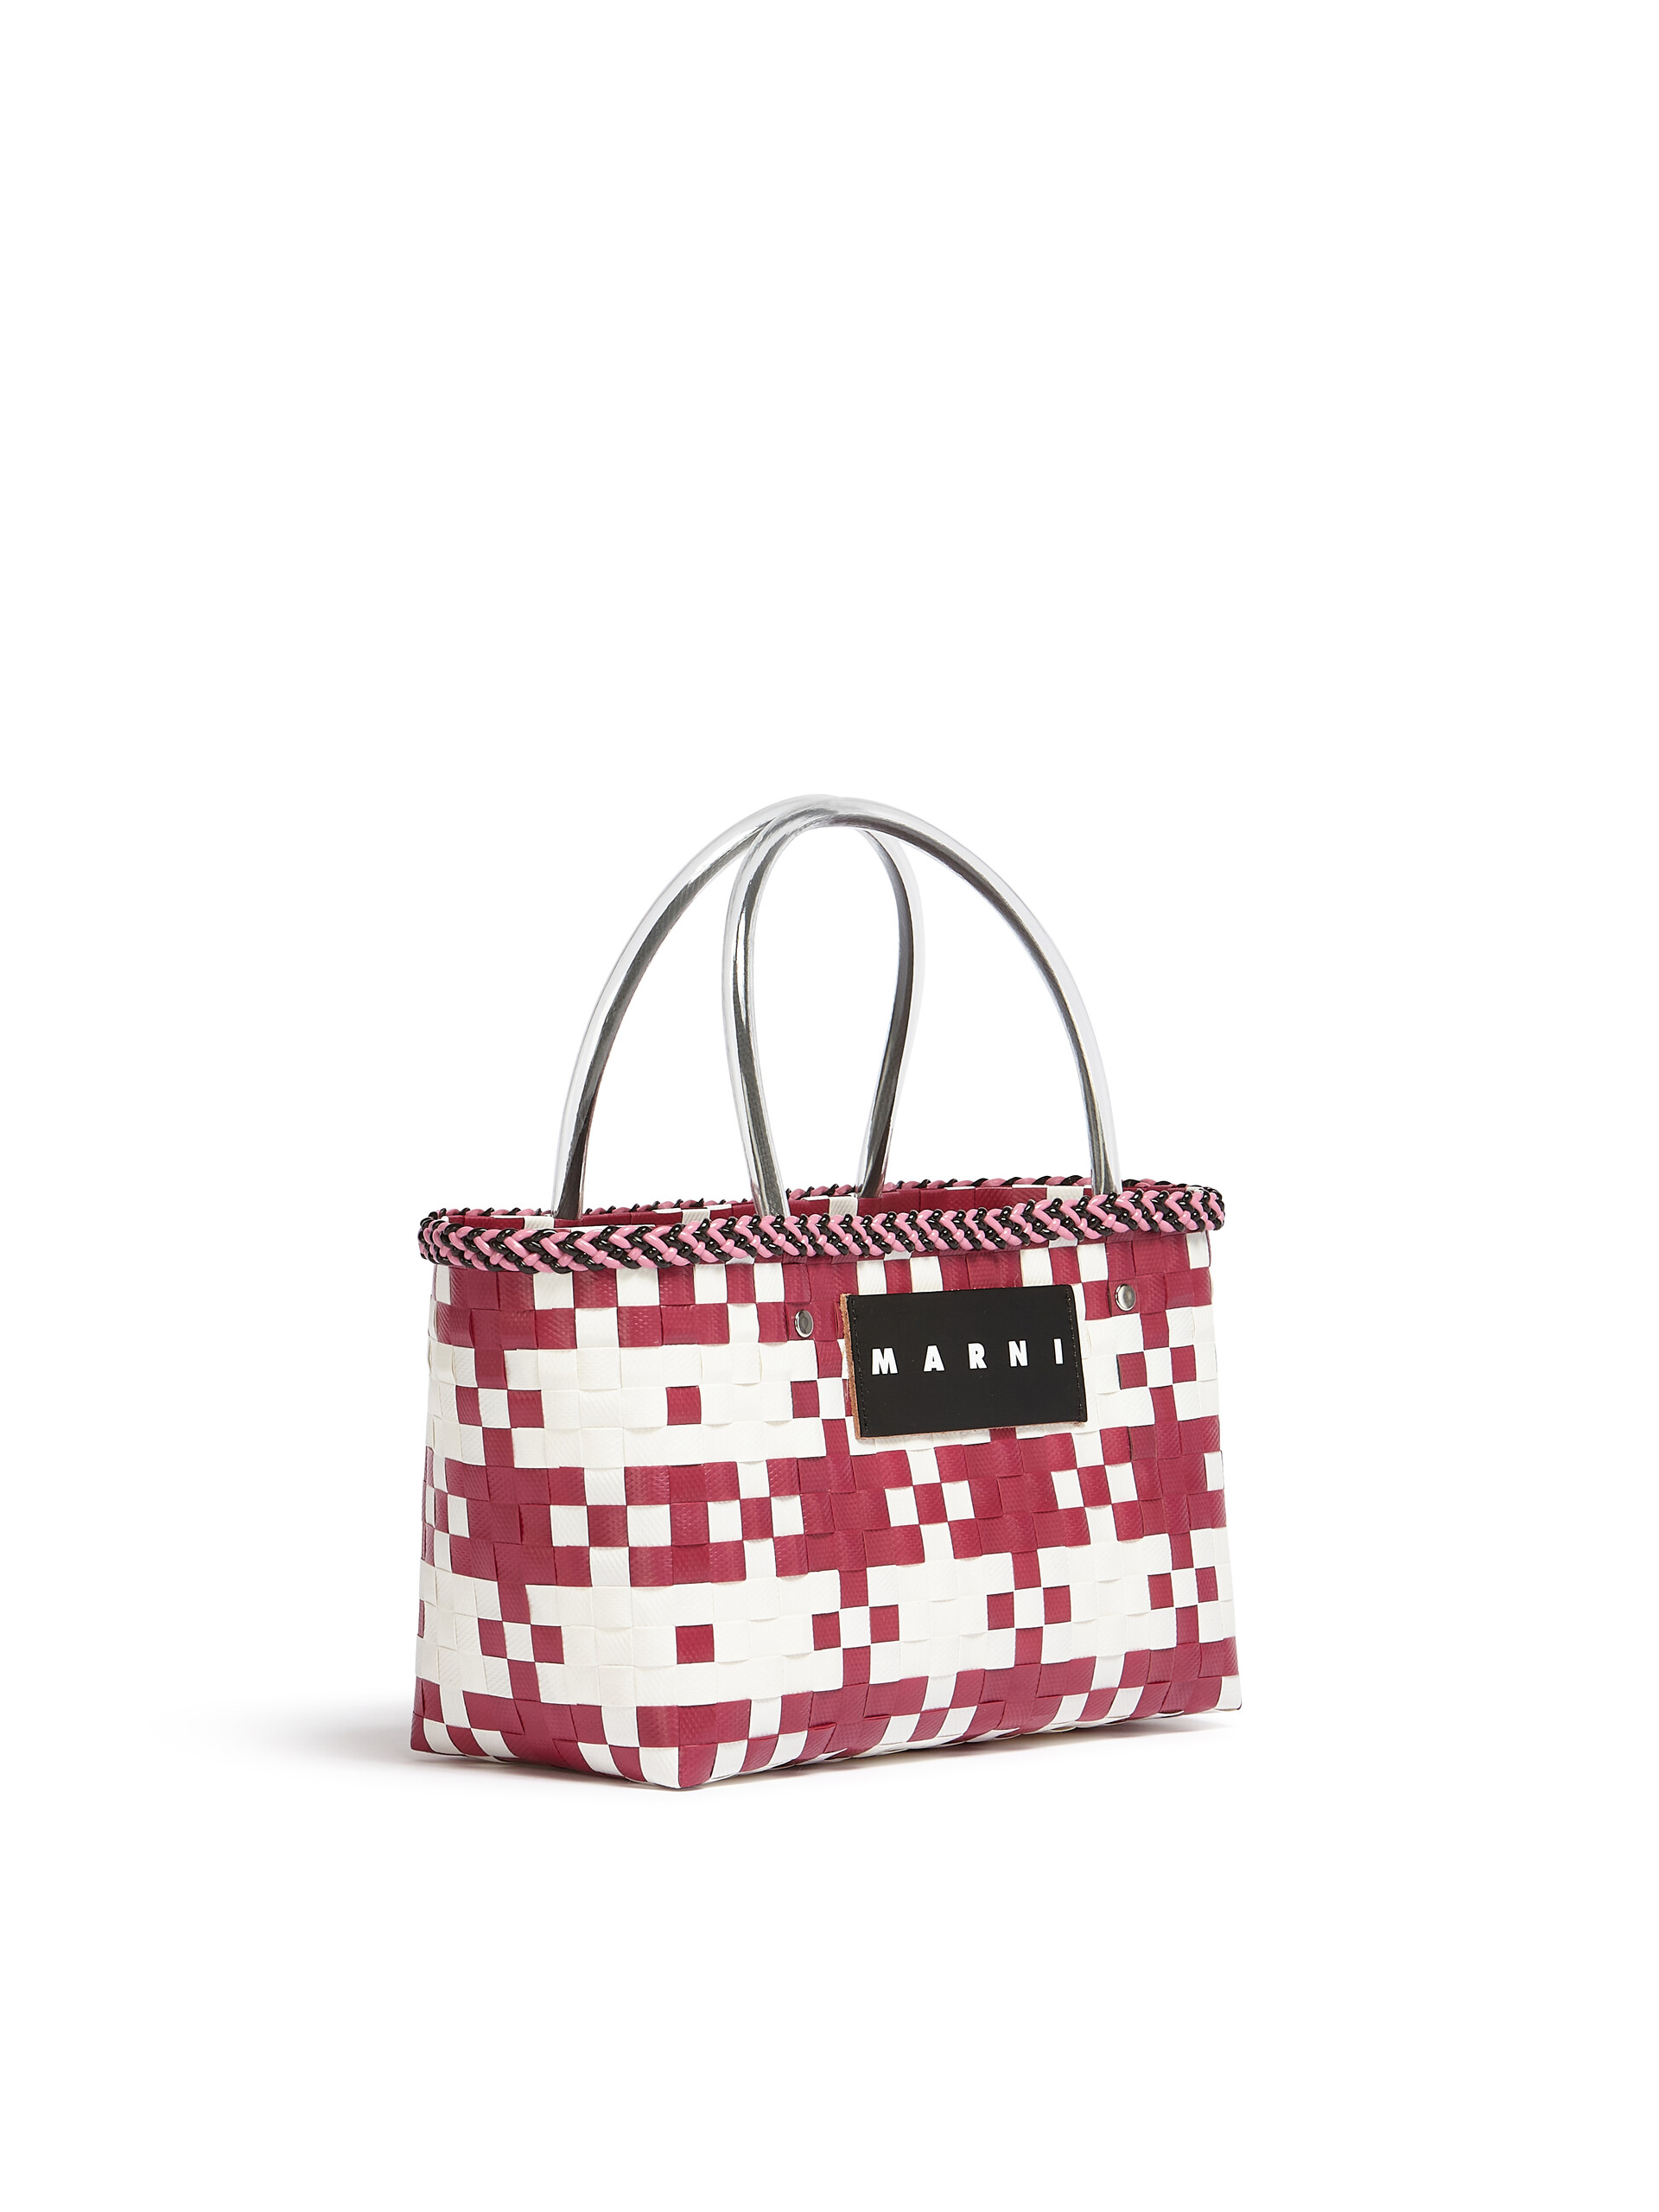 MARNI MARKET CHECK in red and white tartan woven material - Bags - Image 2